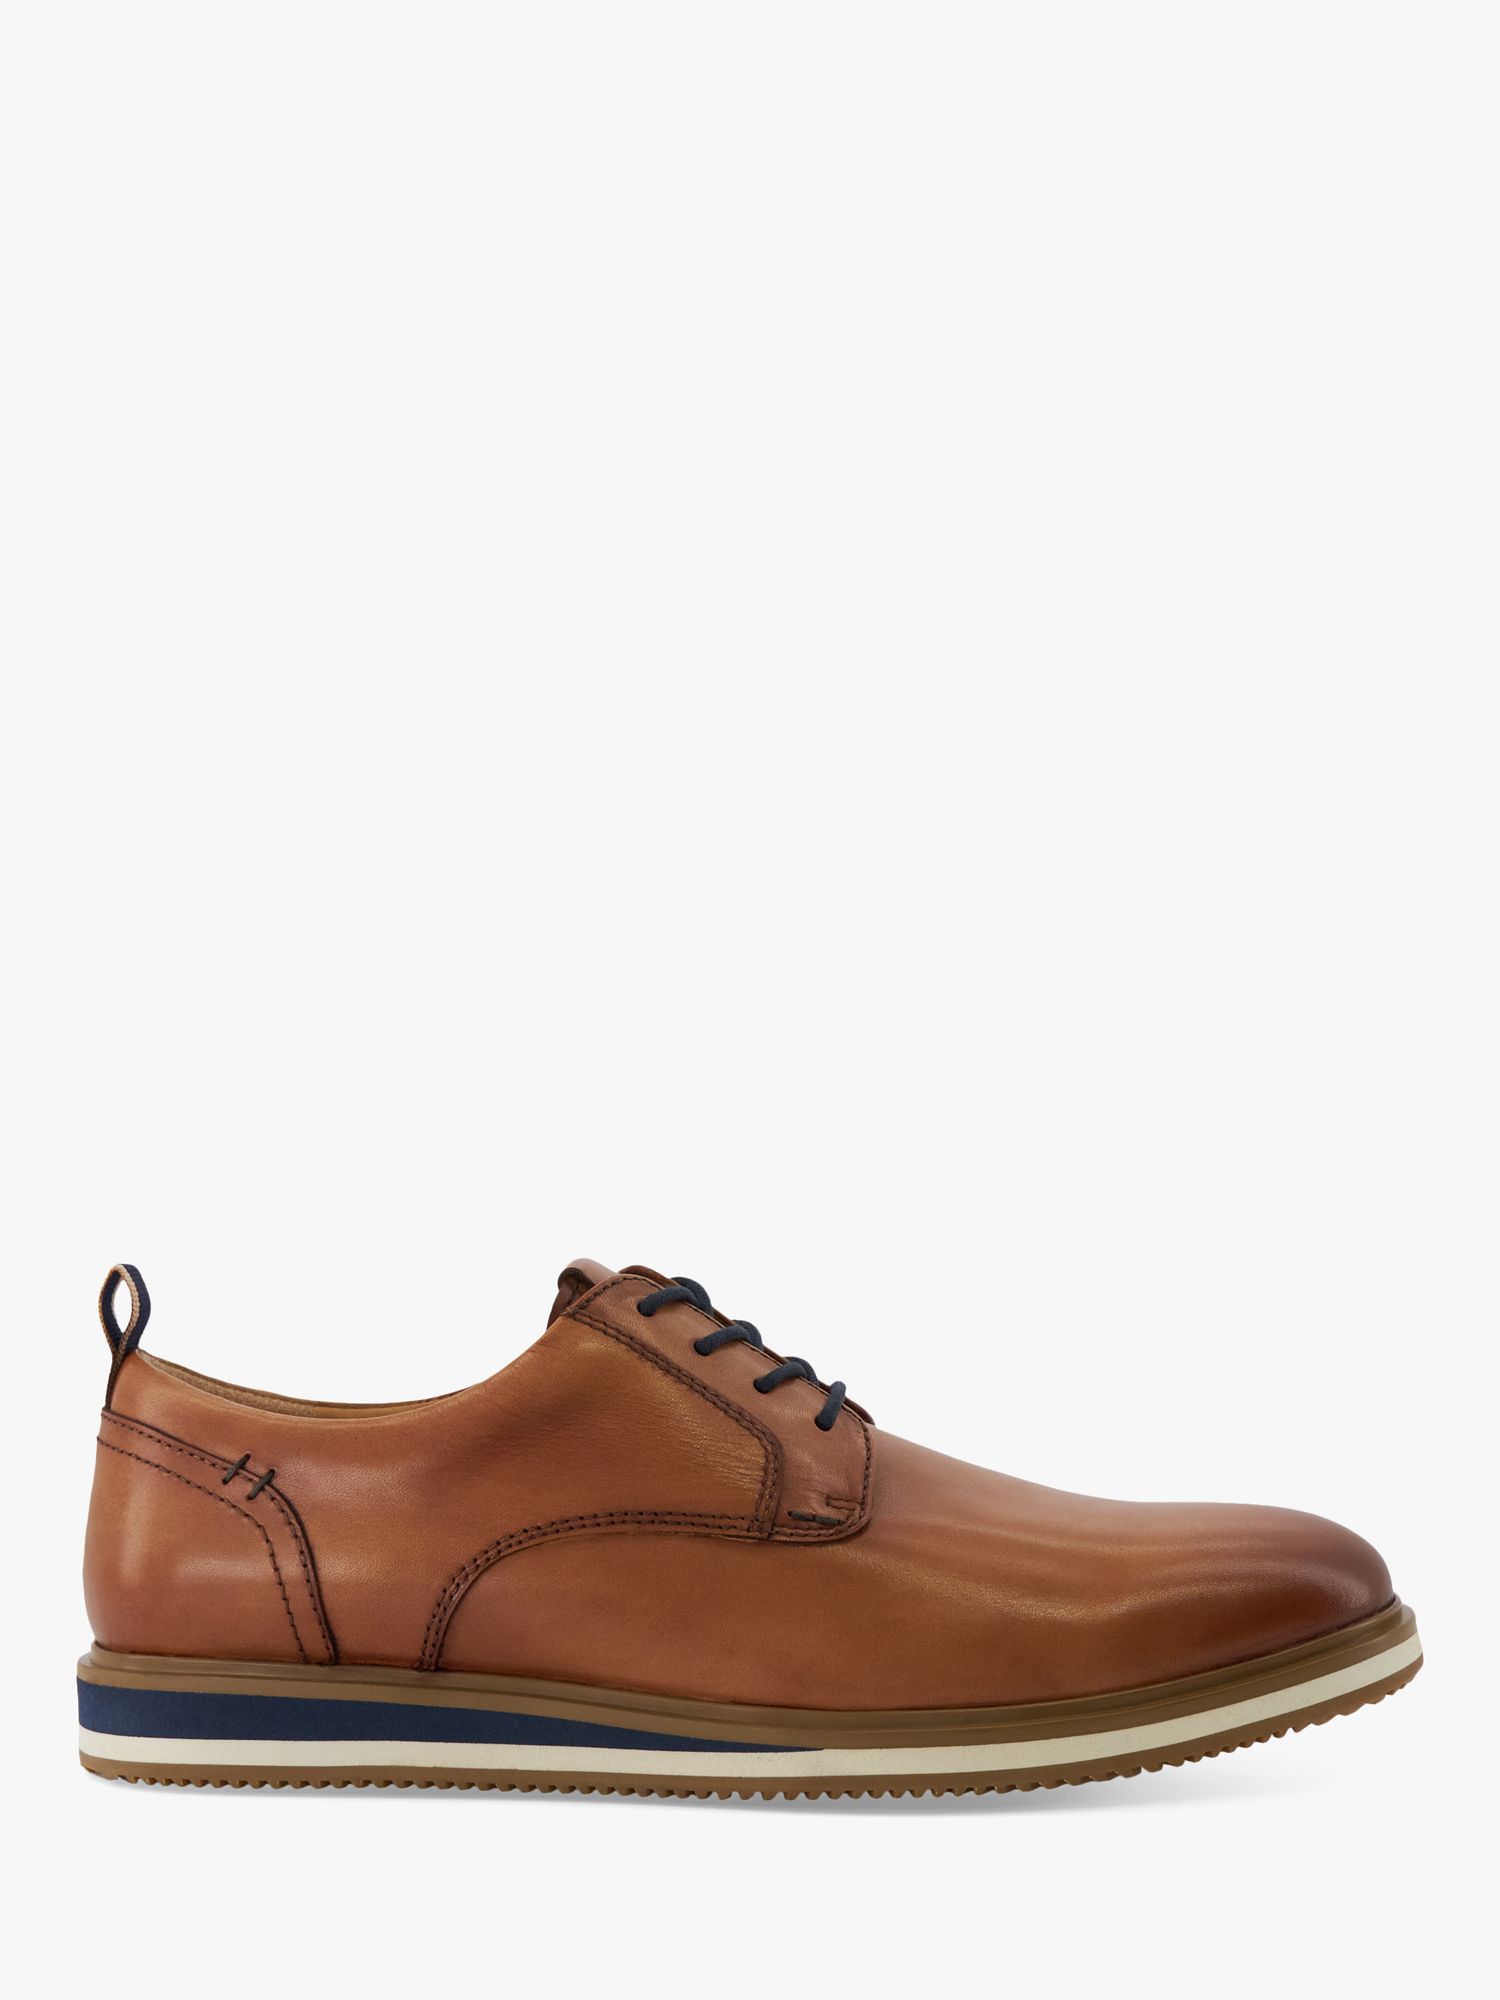 Buy Dune Wide Fit Blaksley Leather Plain Toe Hybrid Sole Shoes, Tan Online at johnlewis.com